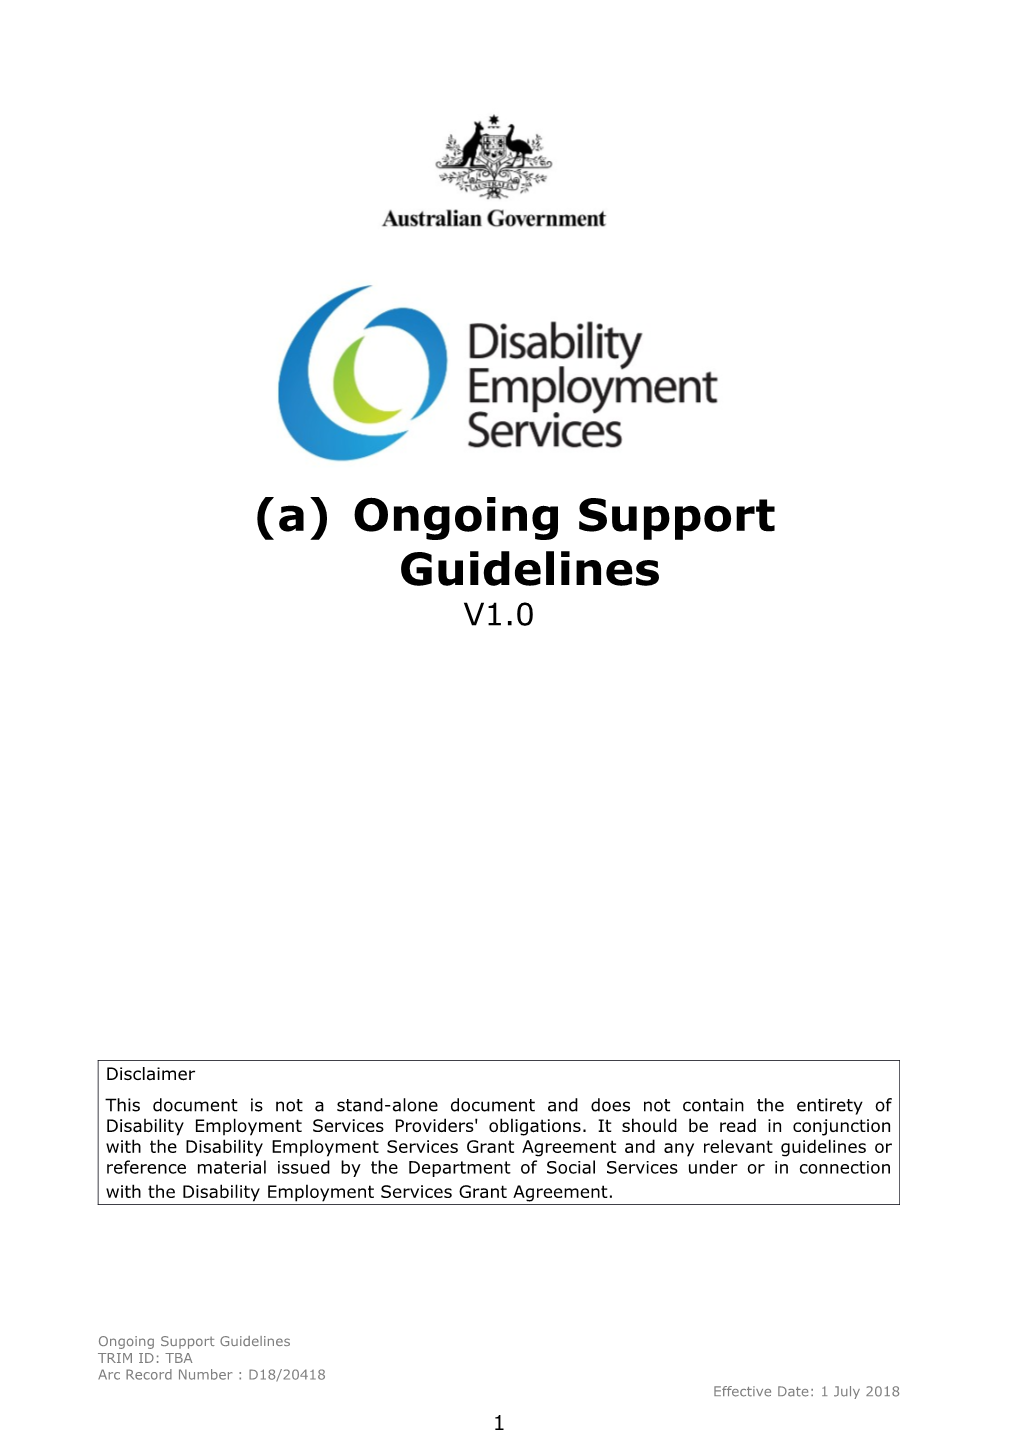 Ongoing Support Guidelines